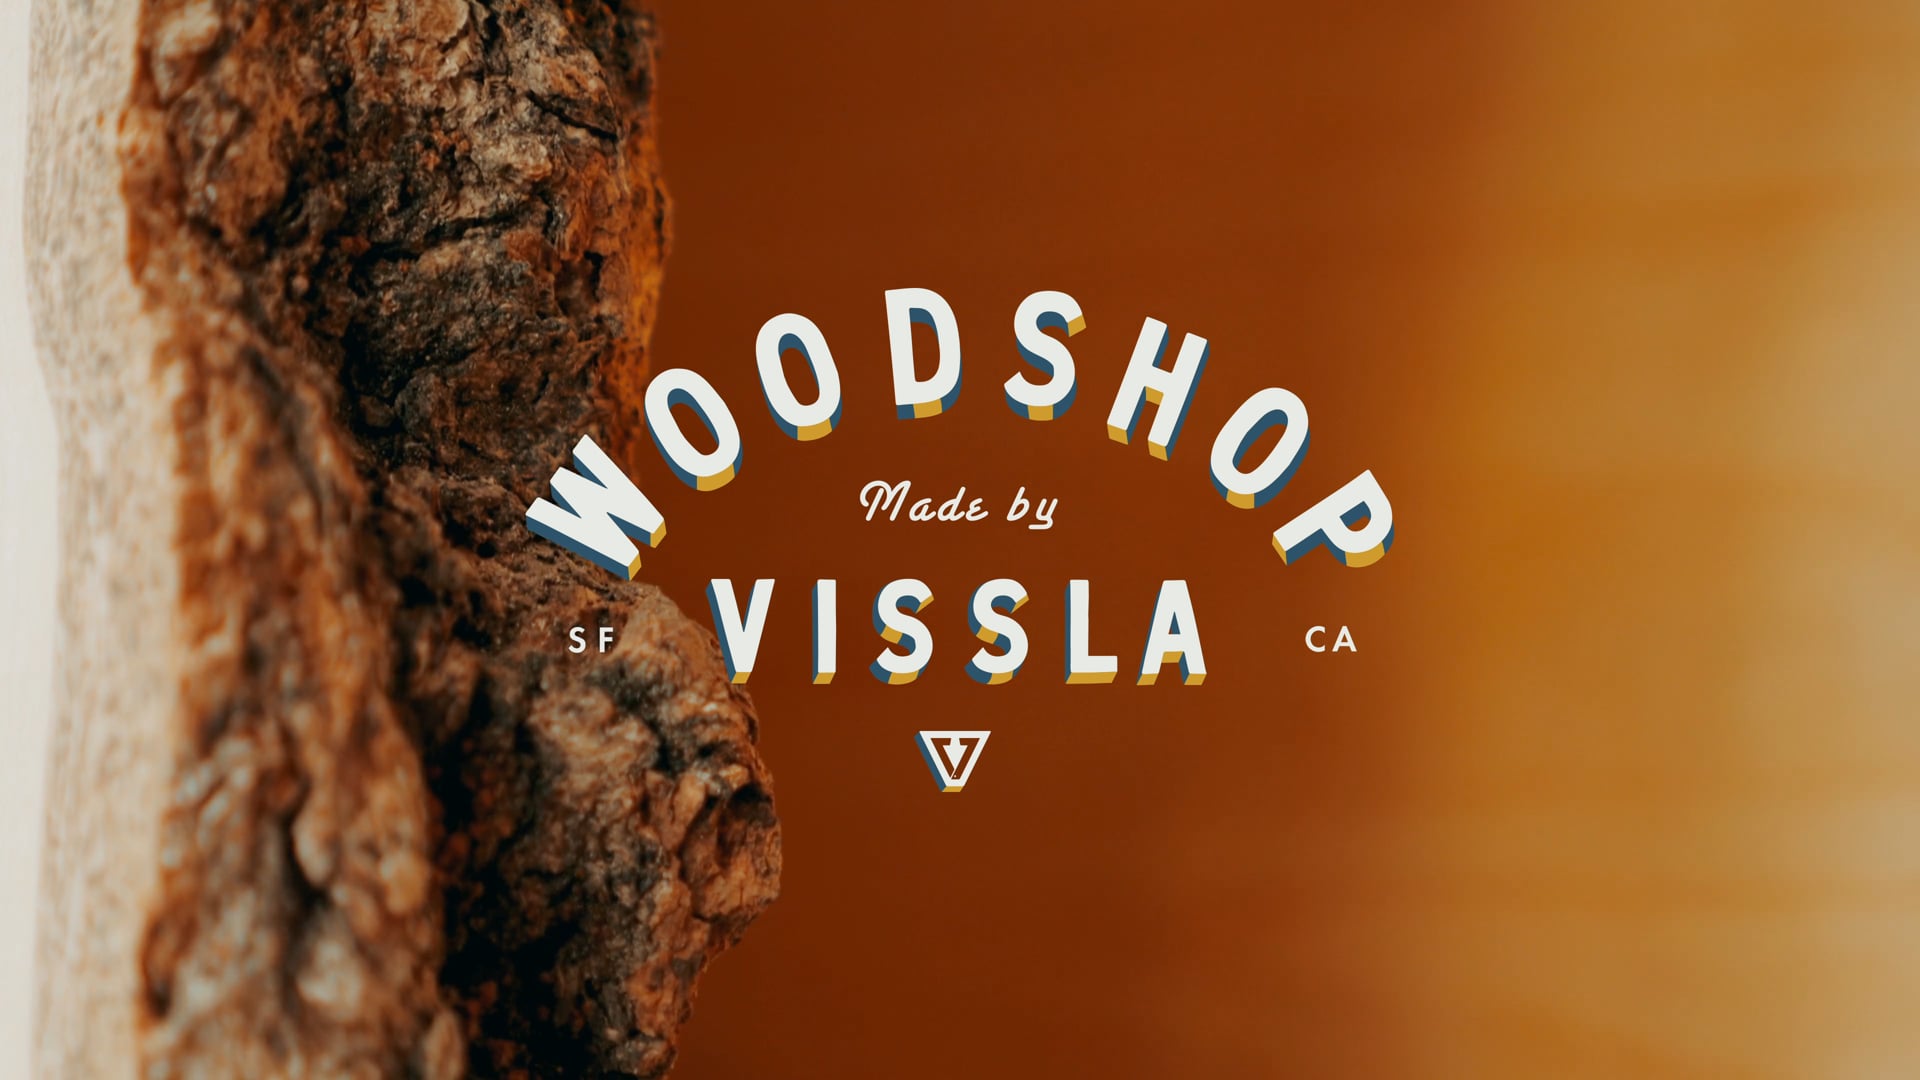 Woodshop Collection Made By Vissla